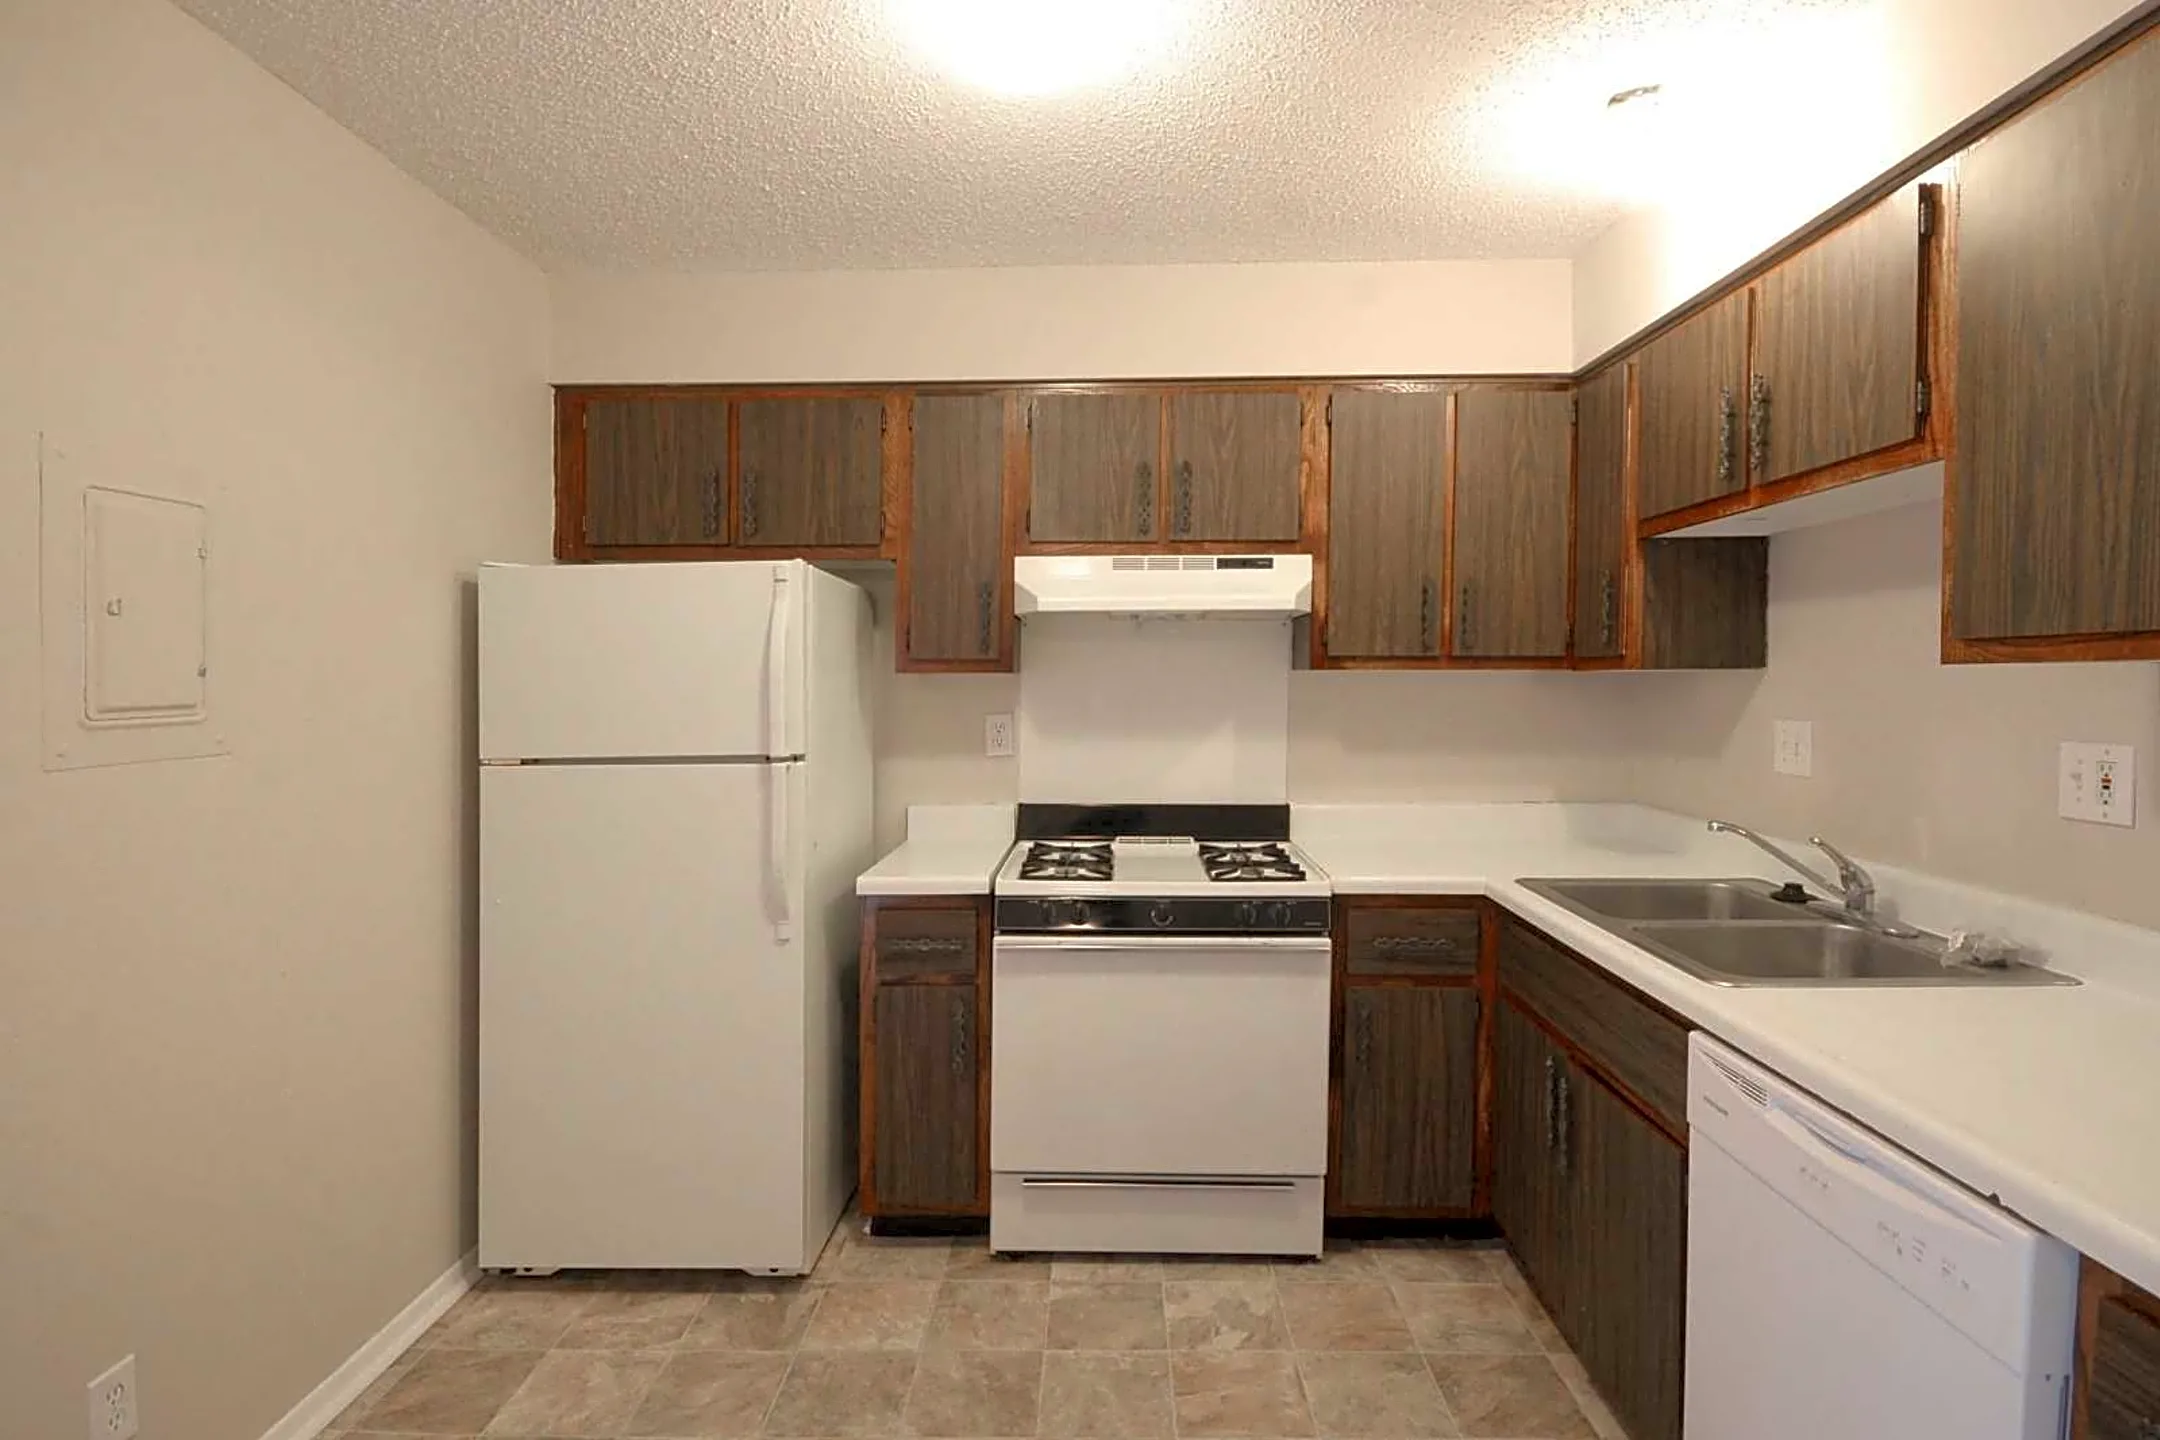 Kitchen - Cedar Ridge Townhomes & Apartments - Anderson, IN